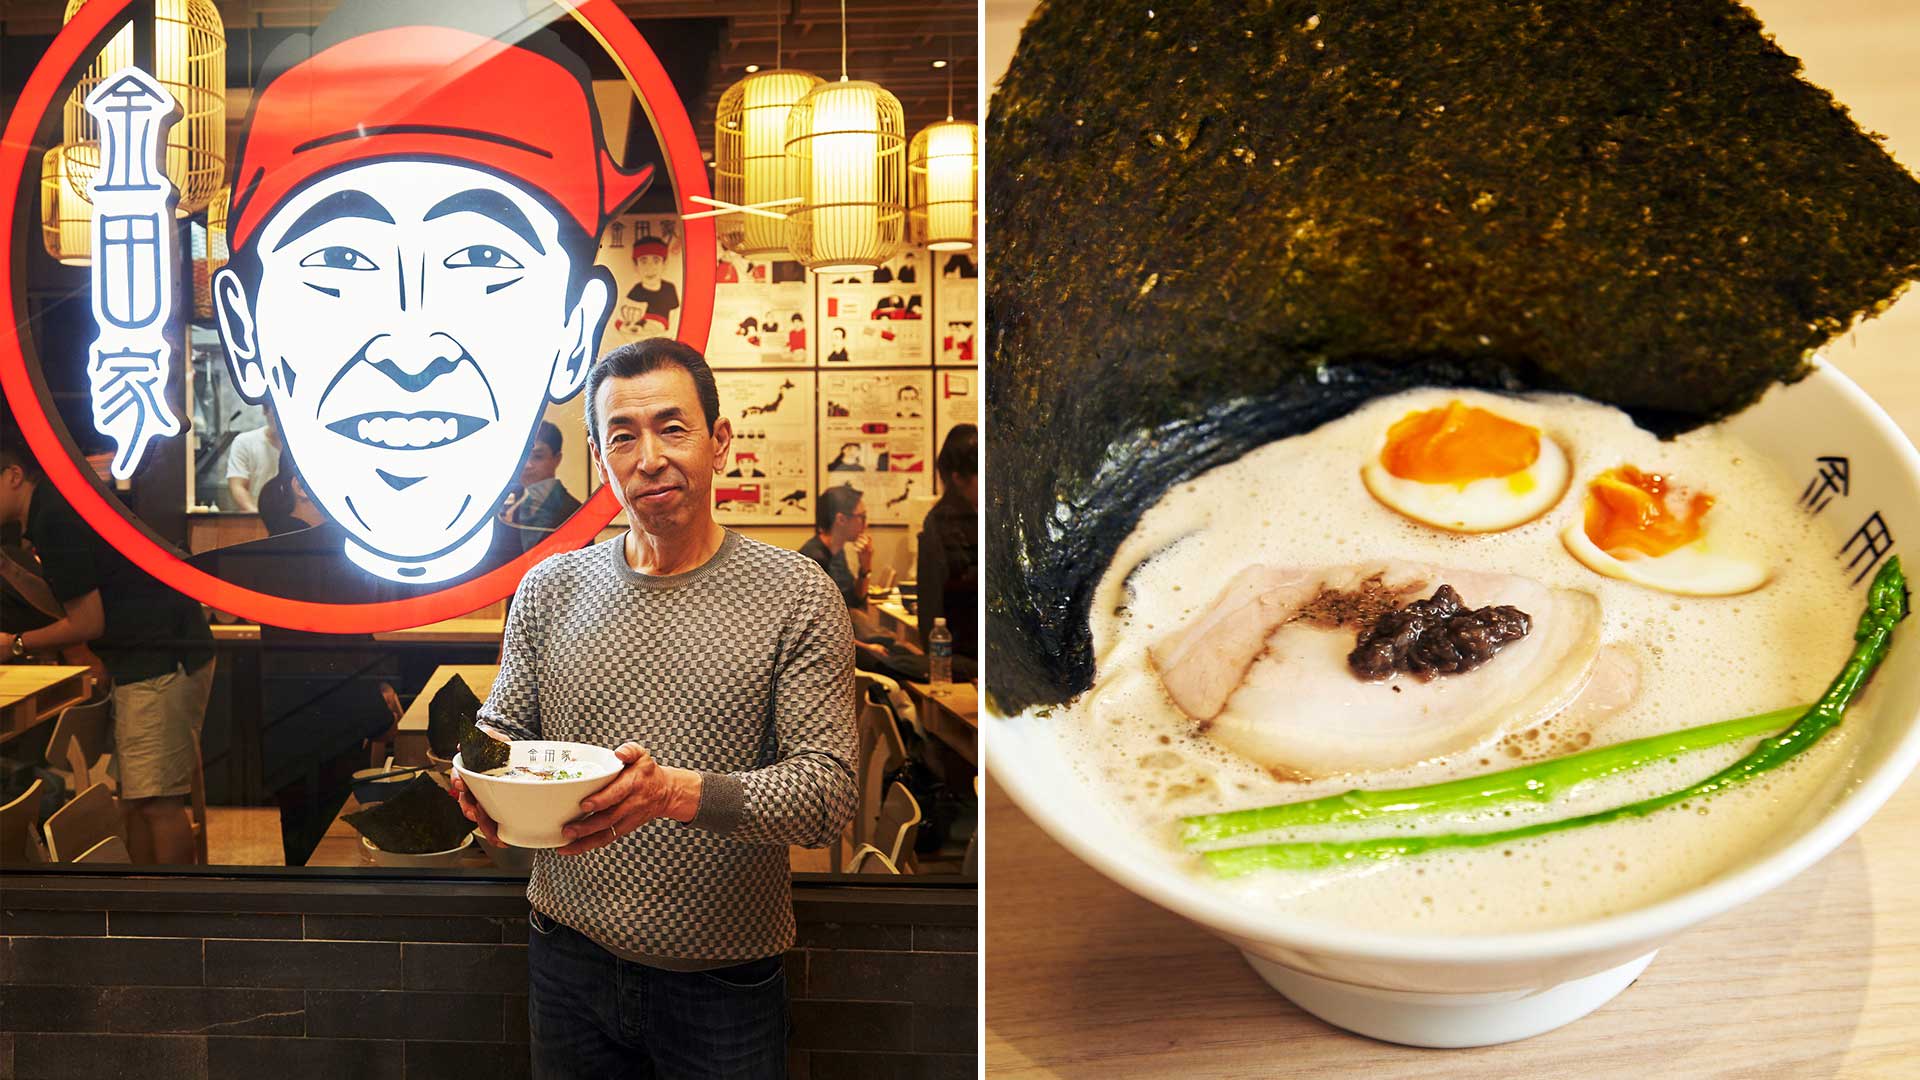 Japanese Ex-Pro Cyclist Turns Ramen Chef After Overcoming Paralysis From Car Crash